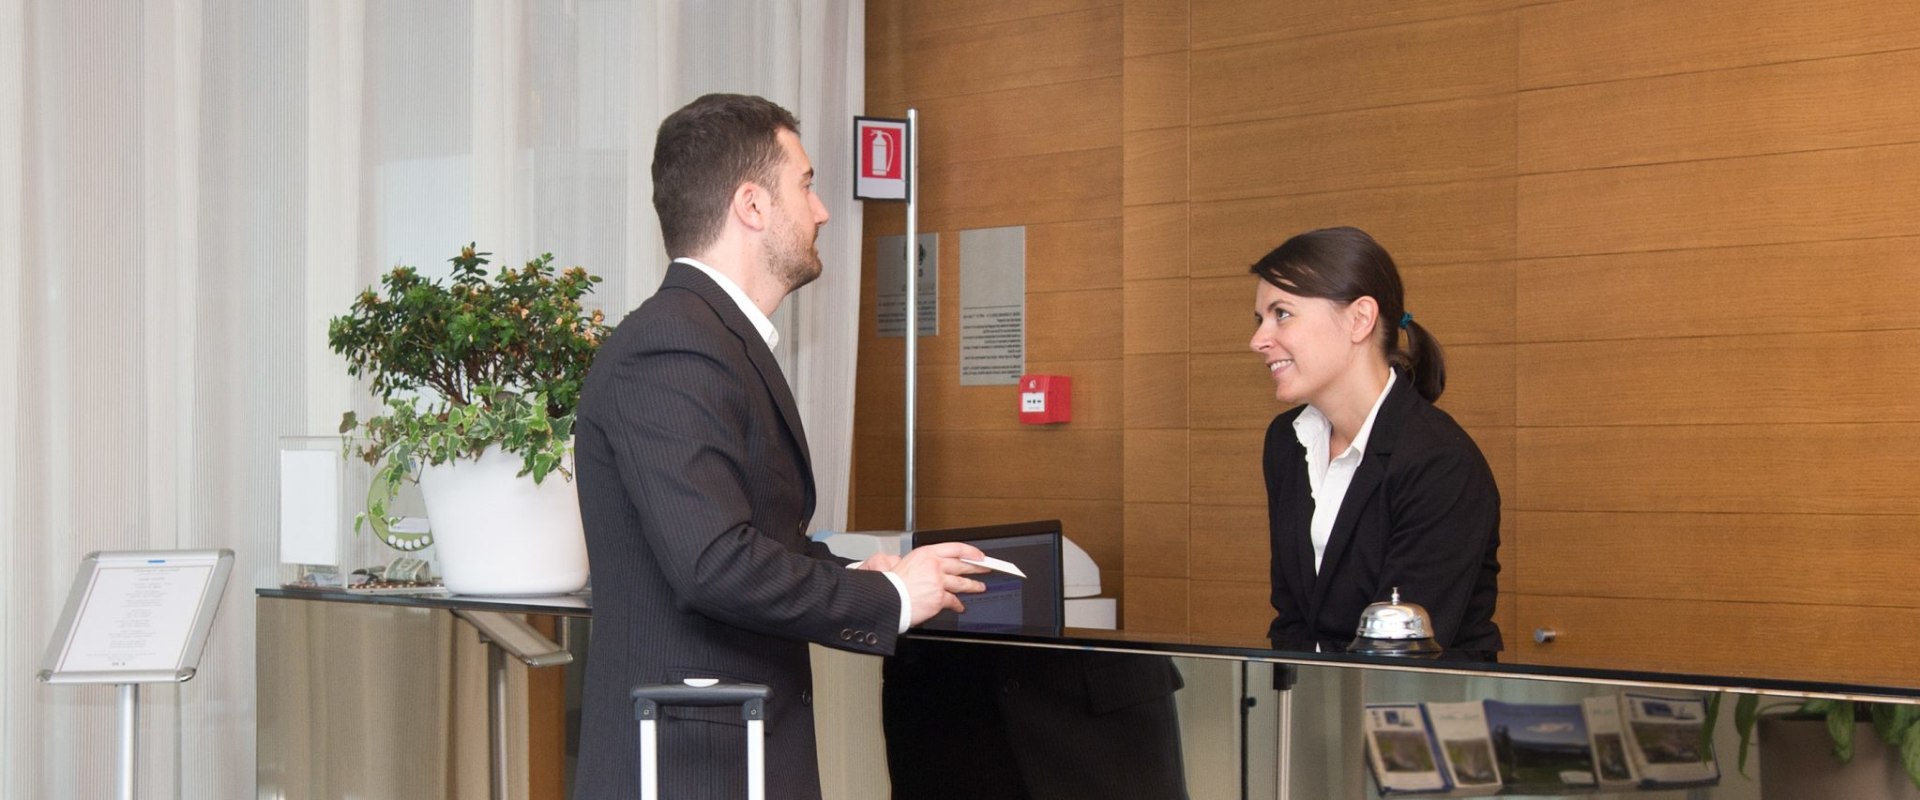 Maximizing Efficiency with Hotel Software: How to Manage Guest Check-In and Check-Out Processes